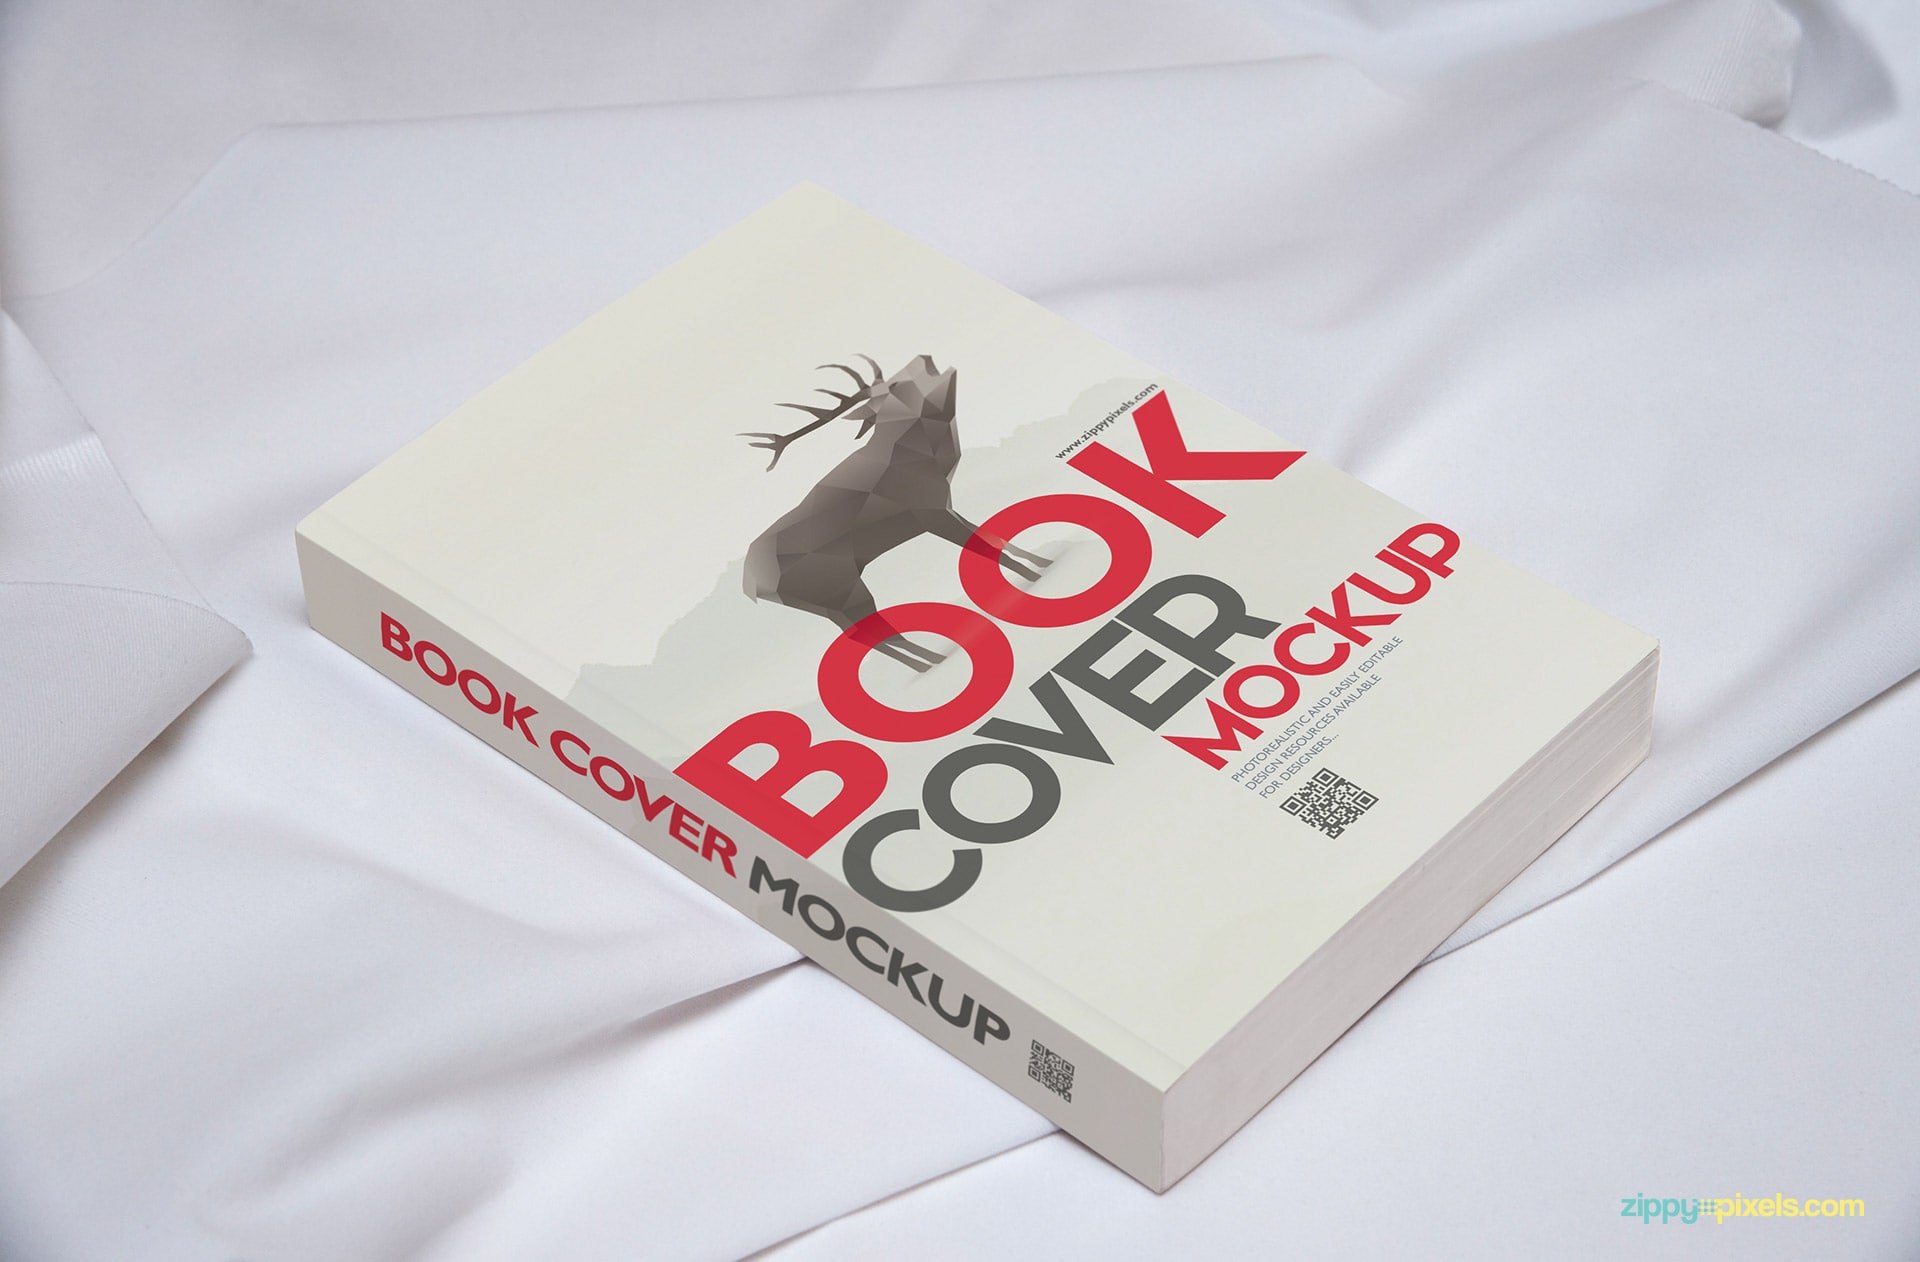 Book cover mockup showing paperback book laying on white clothe